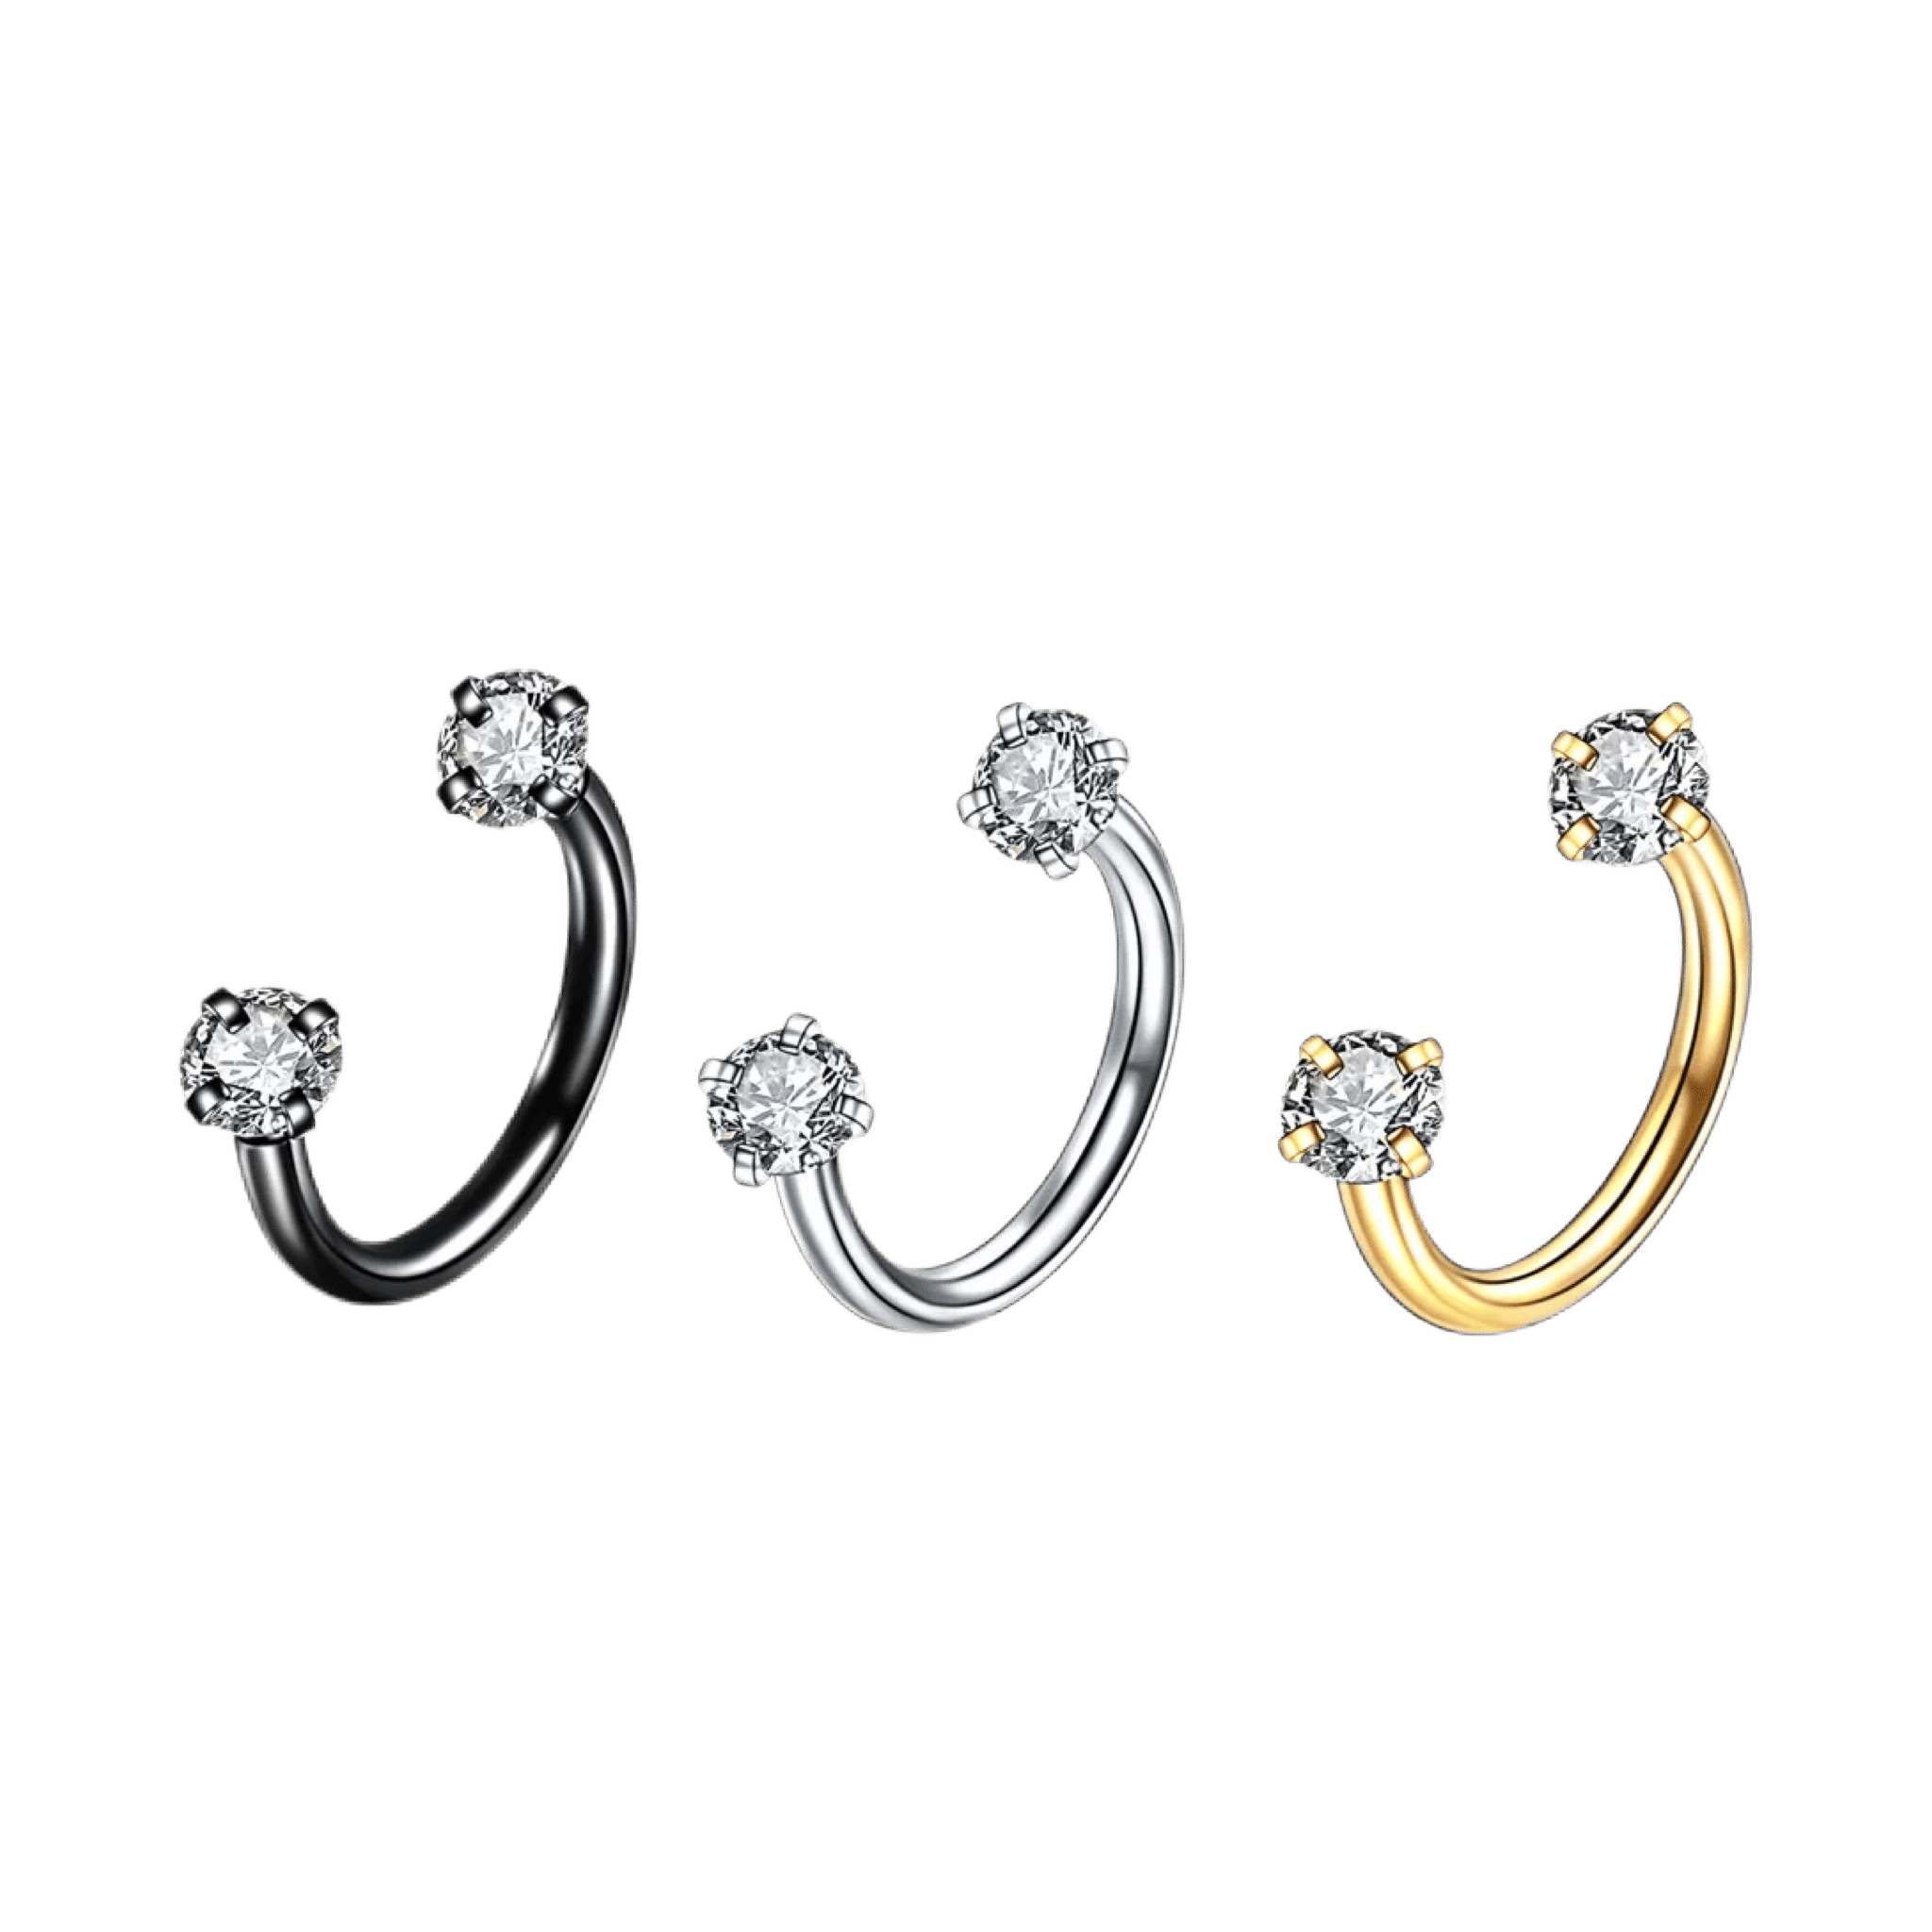 crystal ends horseshoe jewelry stainless steel